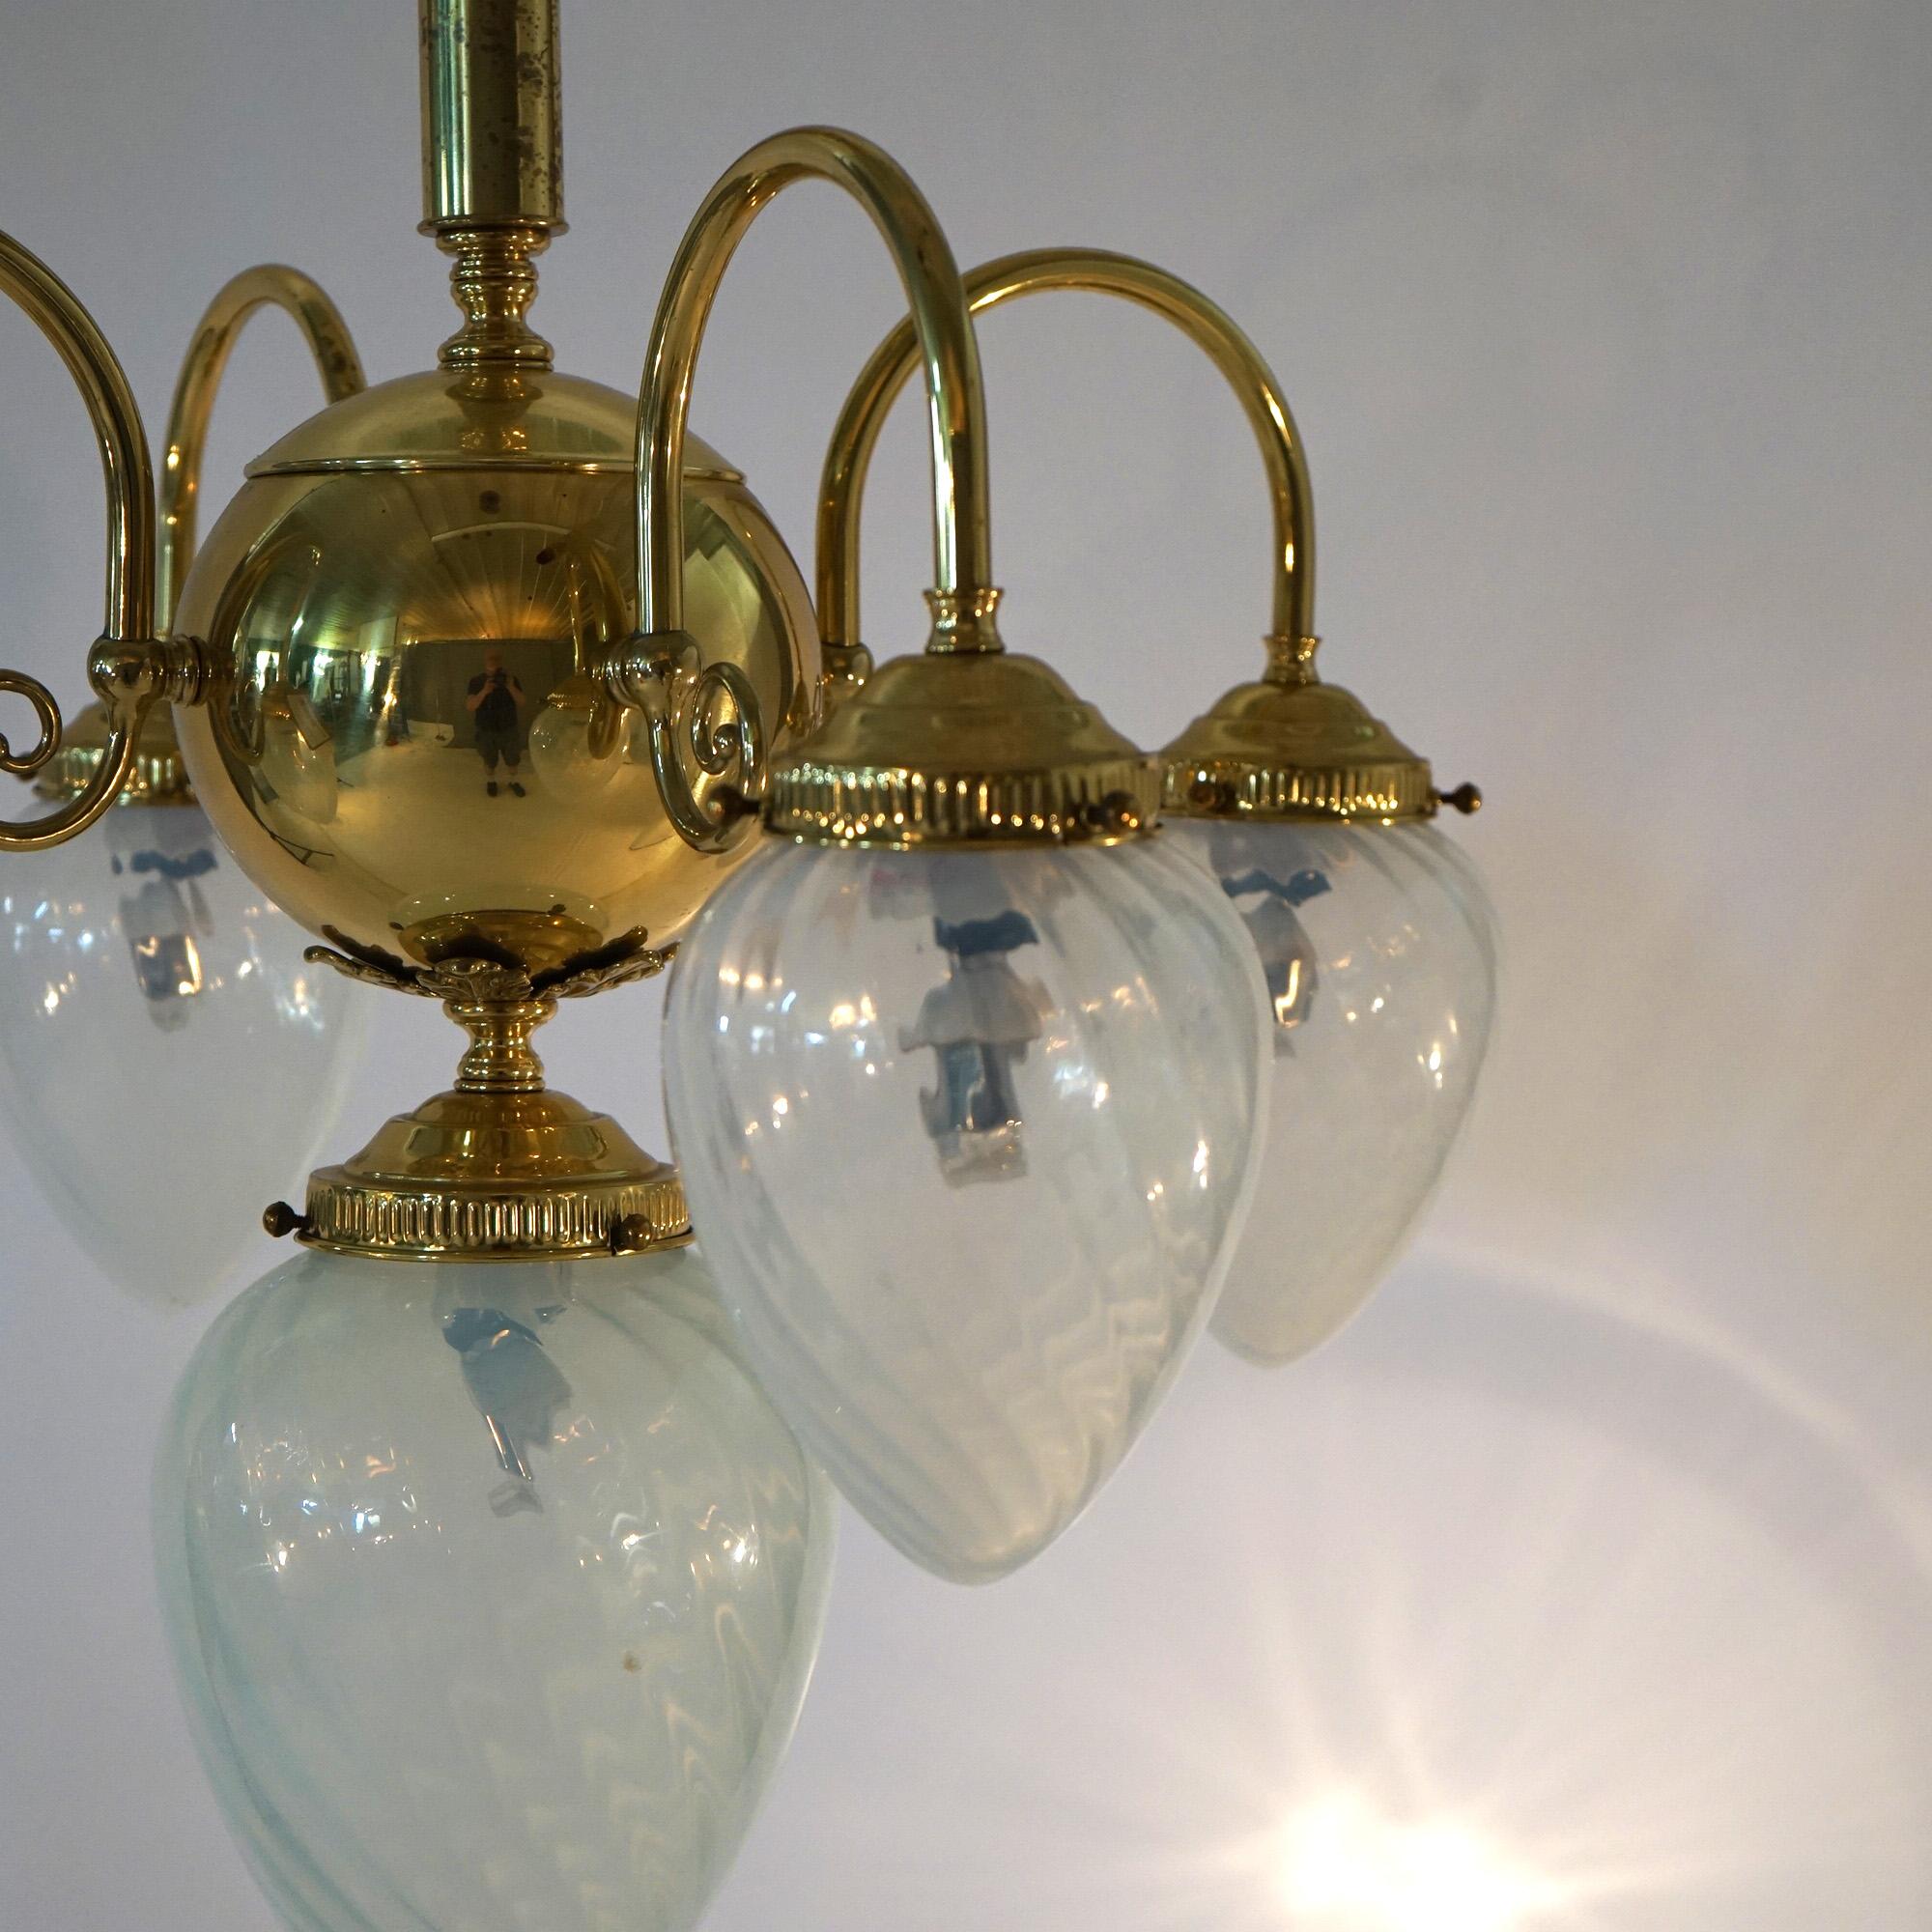 Brass Five-Light Hanging Fixture with Tear Drop Swirl Glass Shades 20th C For Sale 3